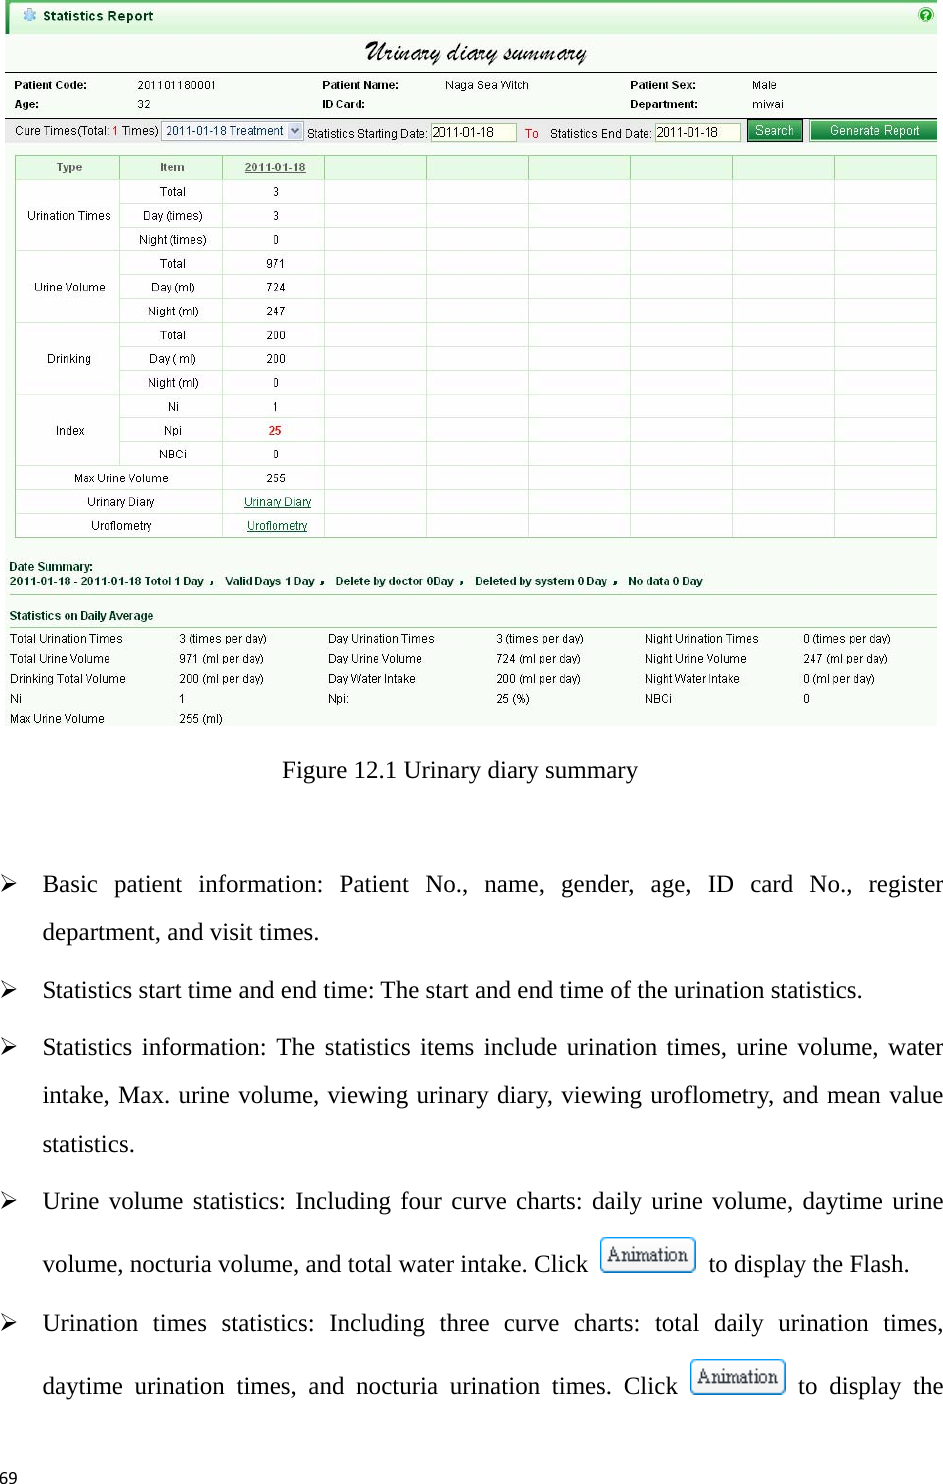 69 Figure 12.1 Urinary diary summary    ¾ Basic patient information: Patient No., name, gender, age, ID card No., register department, and visit times.   ¾ Statistics start time and end time: The start and end time of the urination statistics. ¾ Statistics information: The statistics items include urination times, urine volume, water intake, Max. urine volume, viewing urinary diary, viewing uroflometry, and mean value statistics.  ¾ Urine volume statistics: Including four curve charts: daily urine volume, daytime urine volume, nocturia volume, and total water intake. Click    to display the Flash.   ¾ Urination times statistics: Including three curve charts: total daily urination times, daytime urination times, and nocturia urination times. Click   to display the 